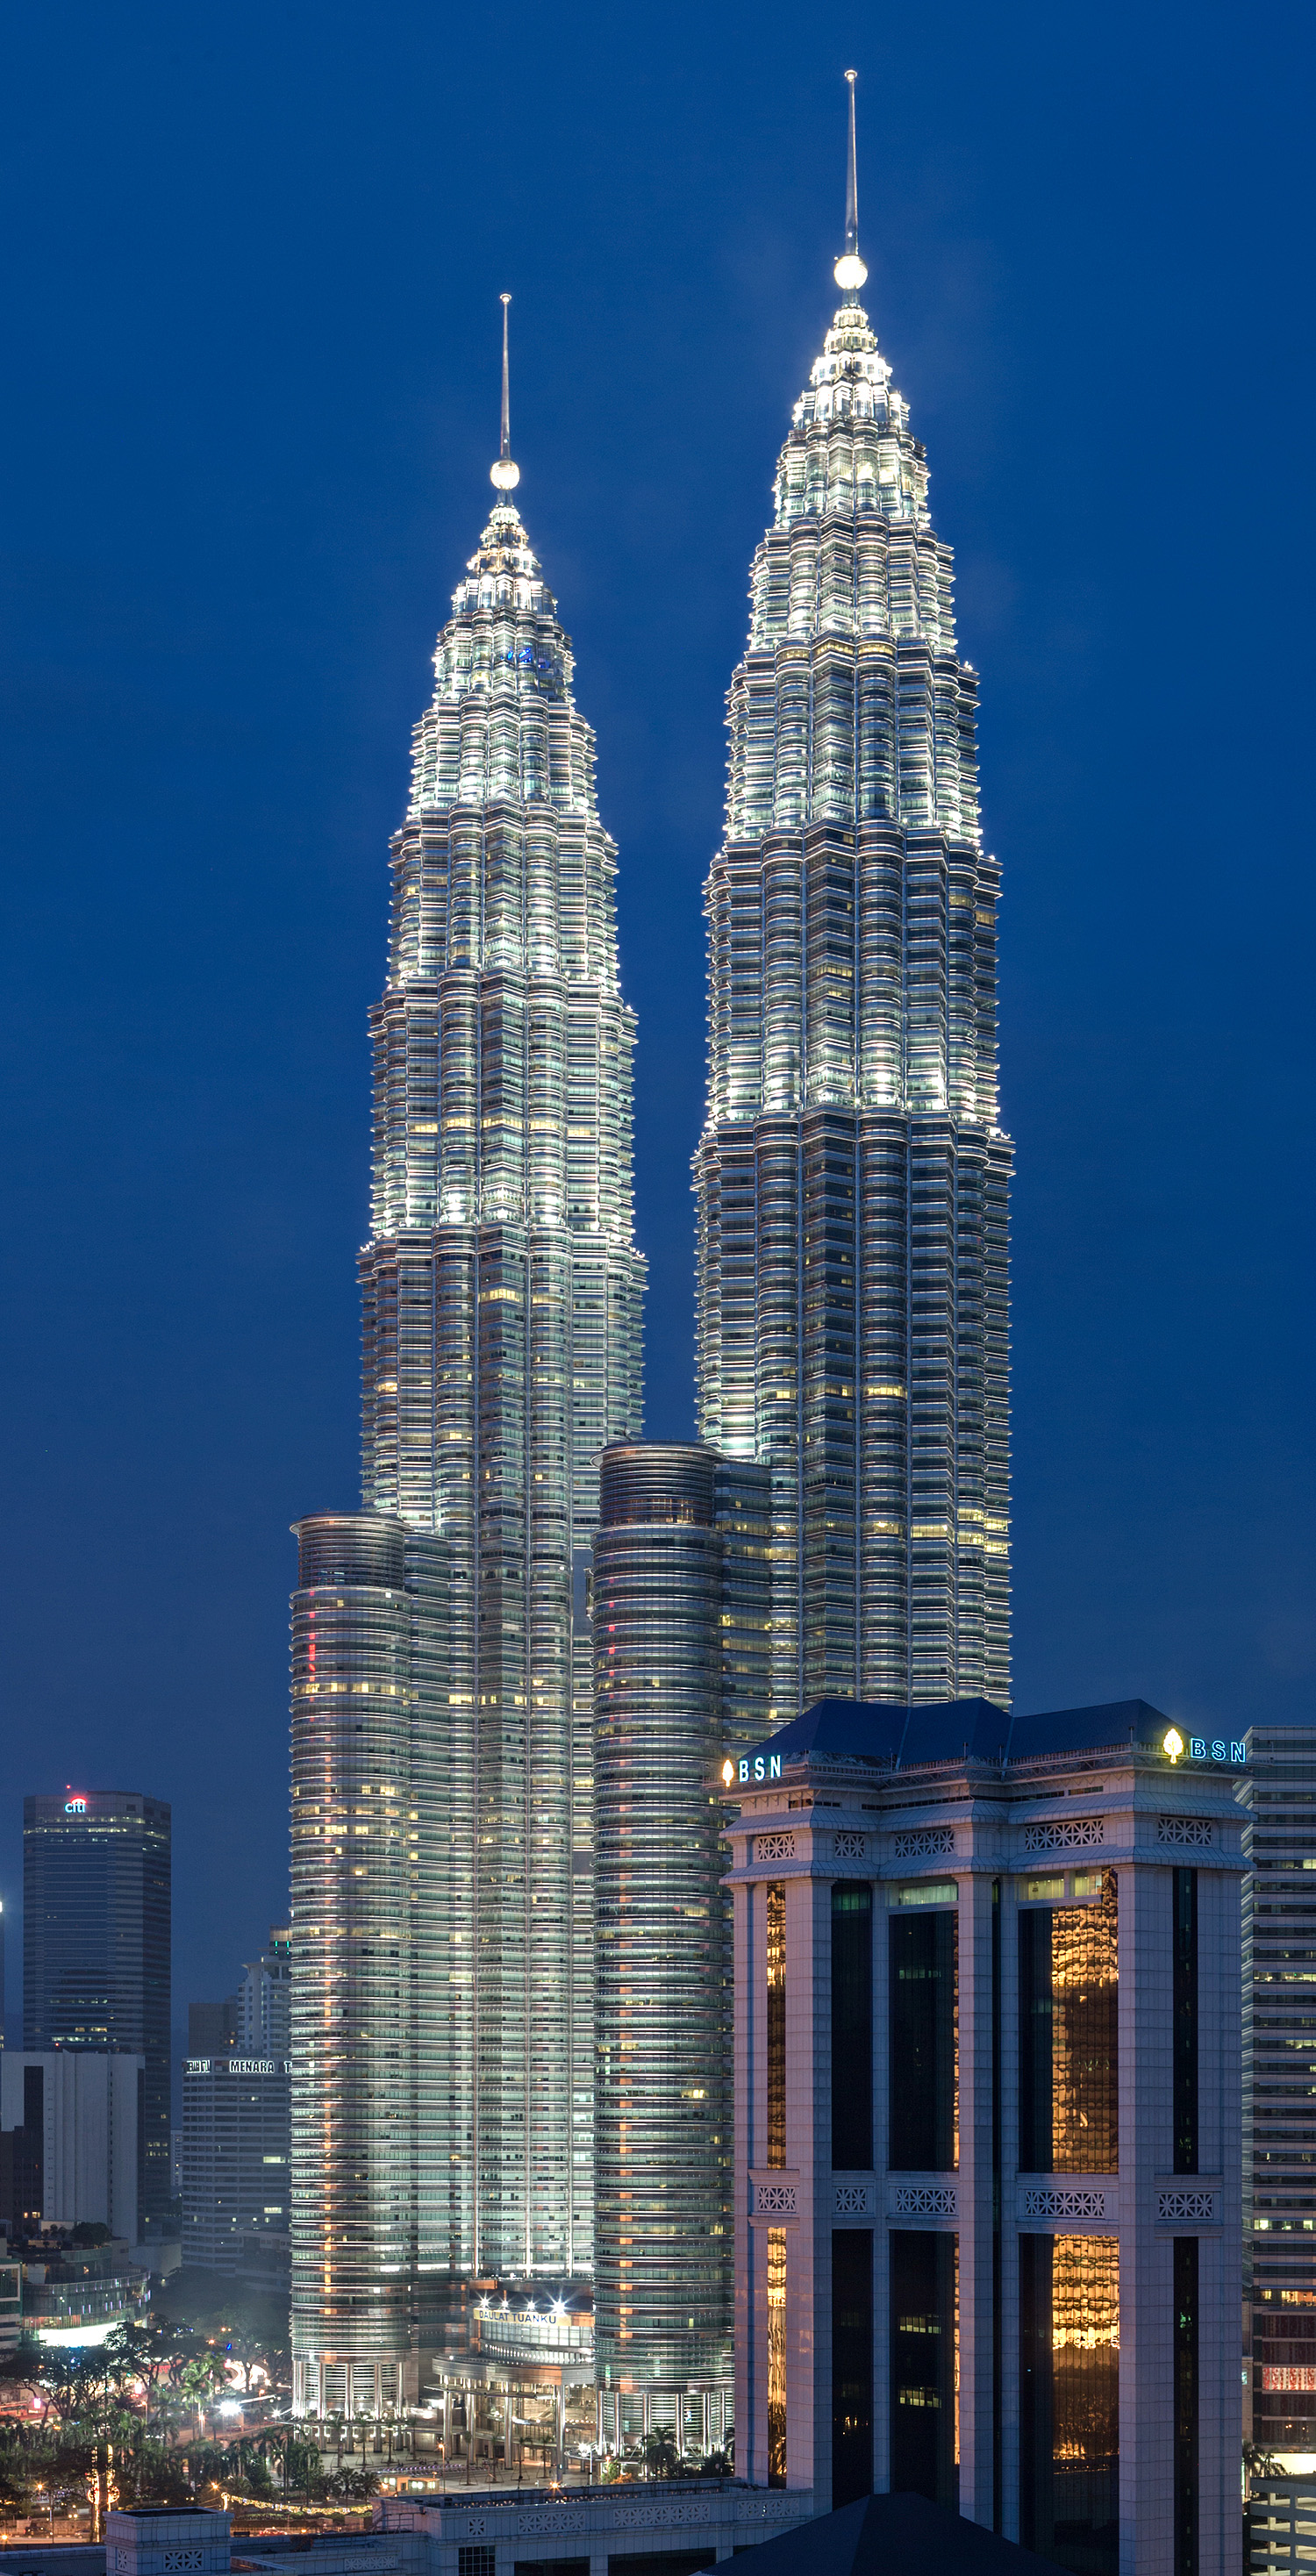 Petronas Twin Tower 2 - View from Renaissance Hotel, Tower 2 is the left tower 